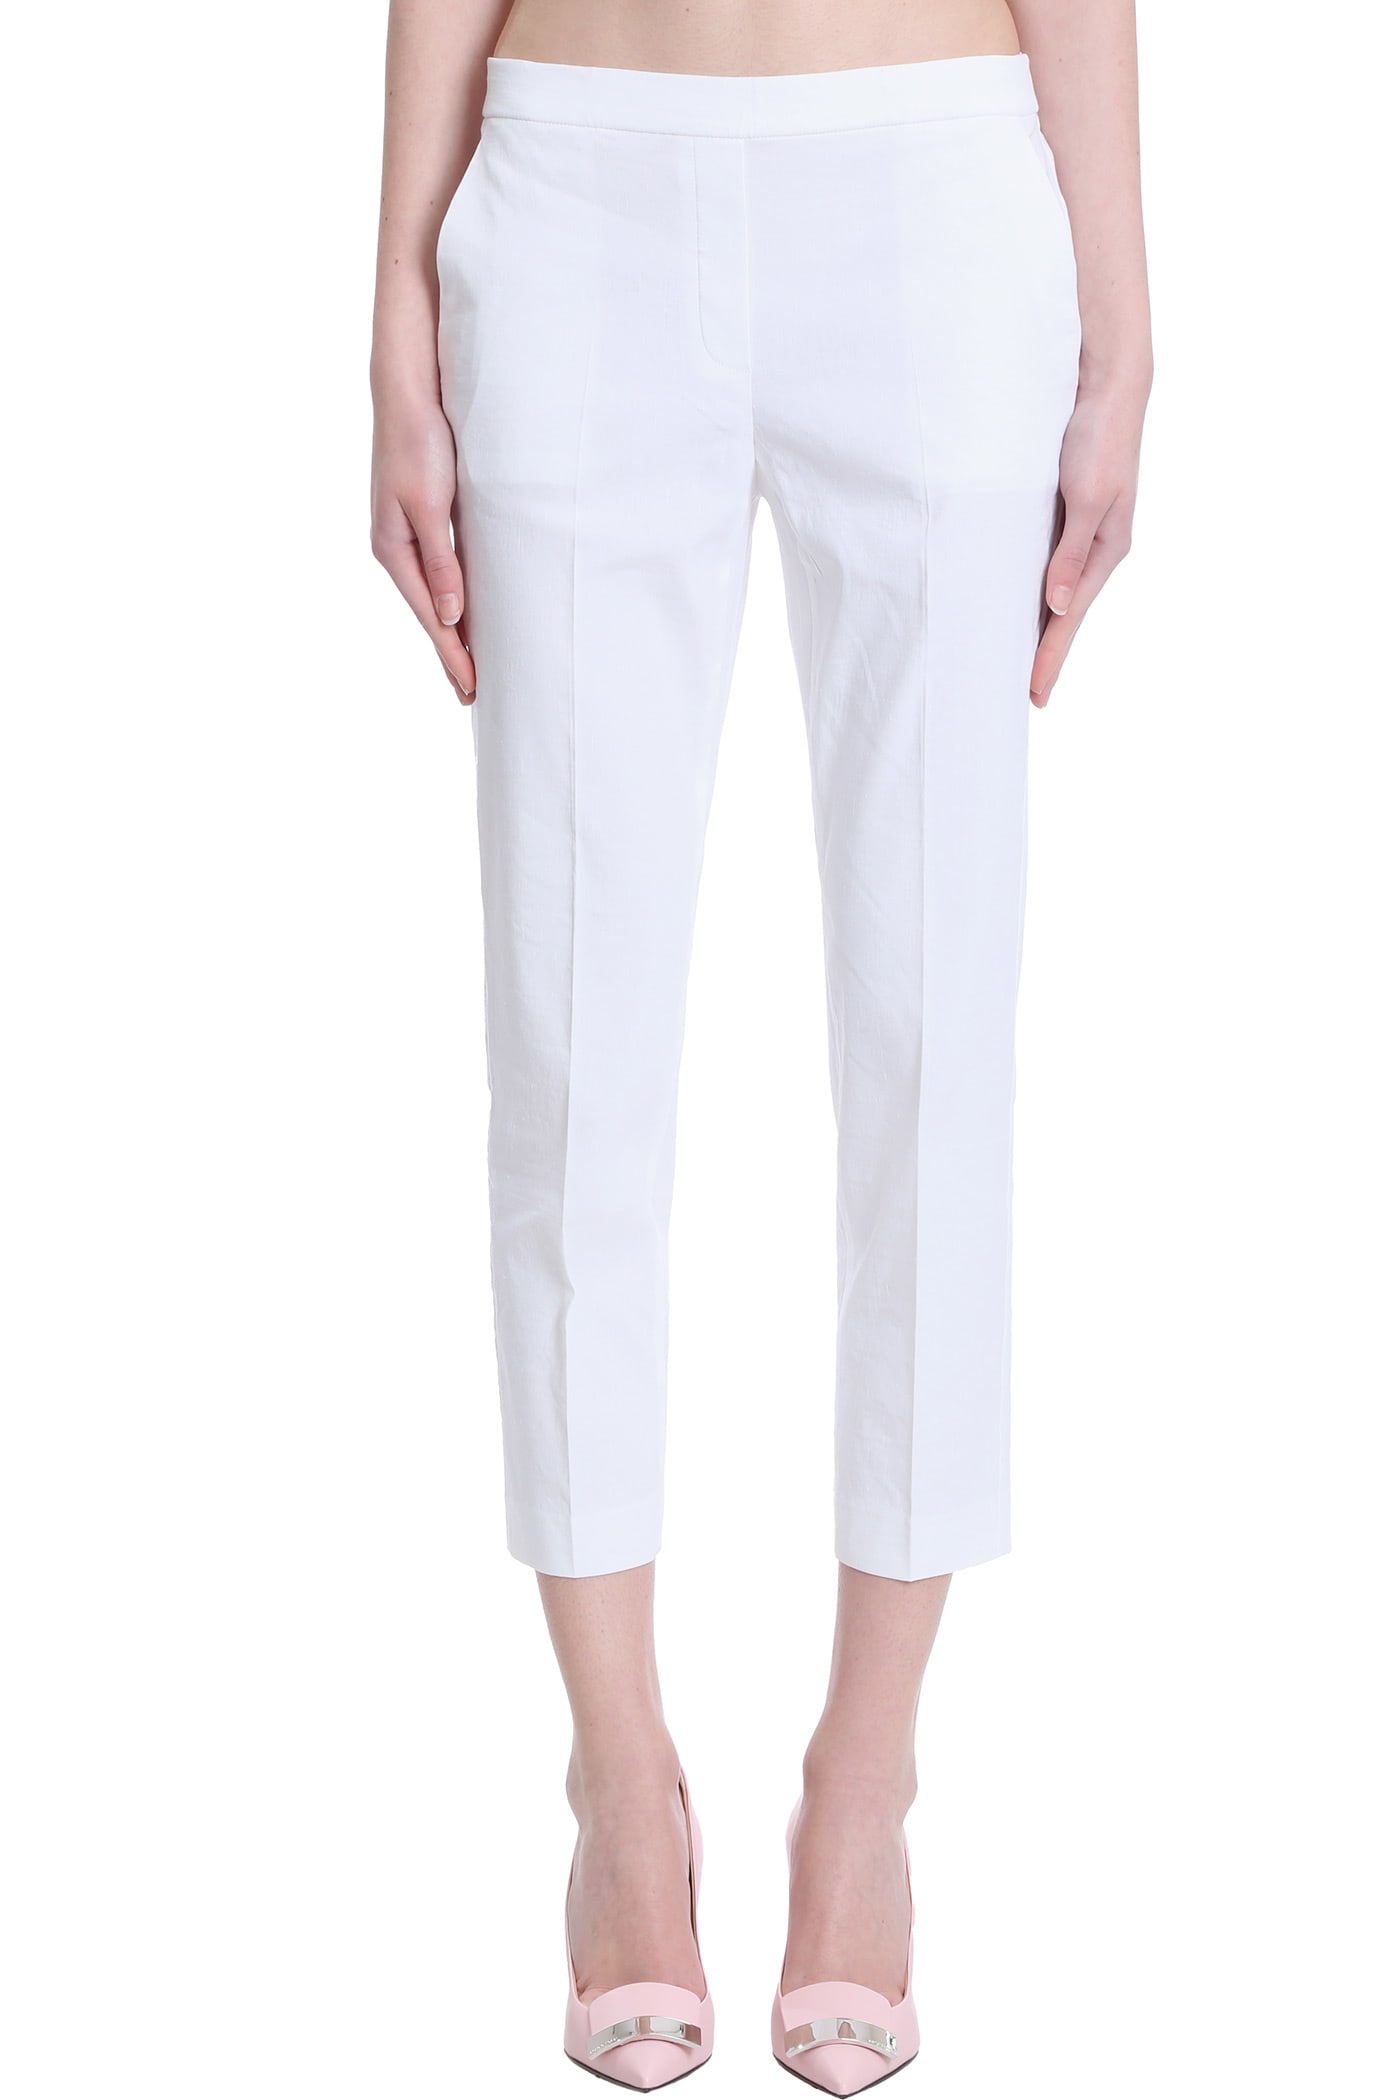 THEORY PANTS IN WHITE LINEN,K0203201100